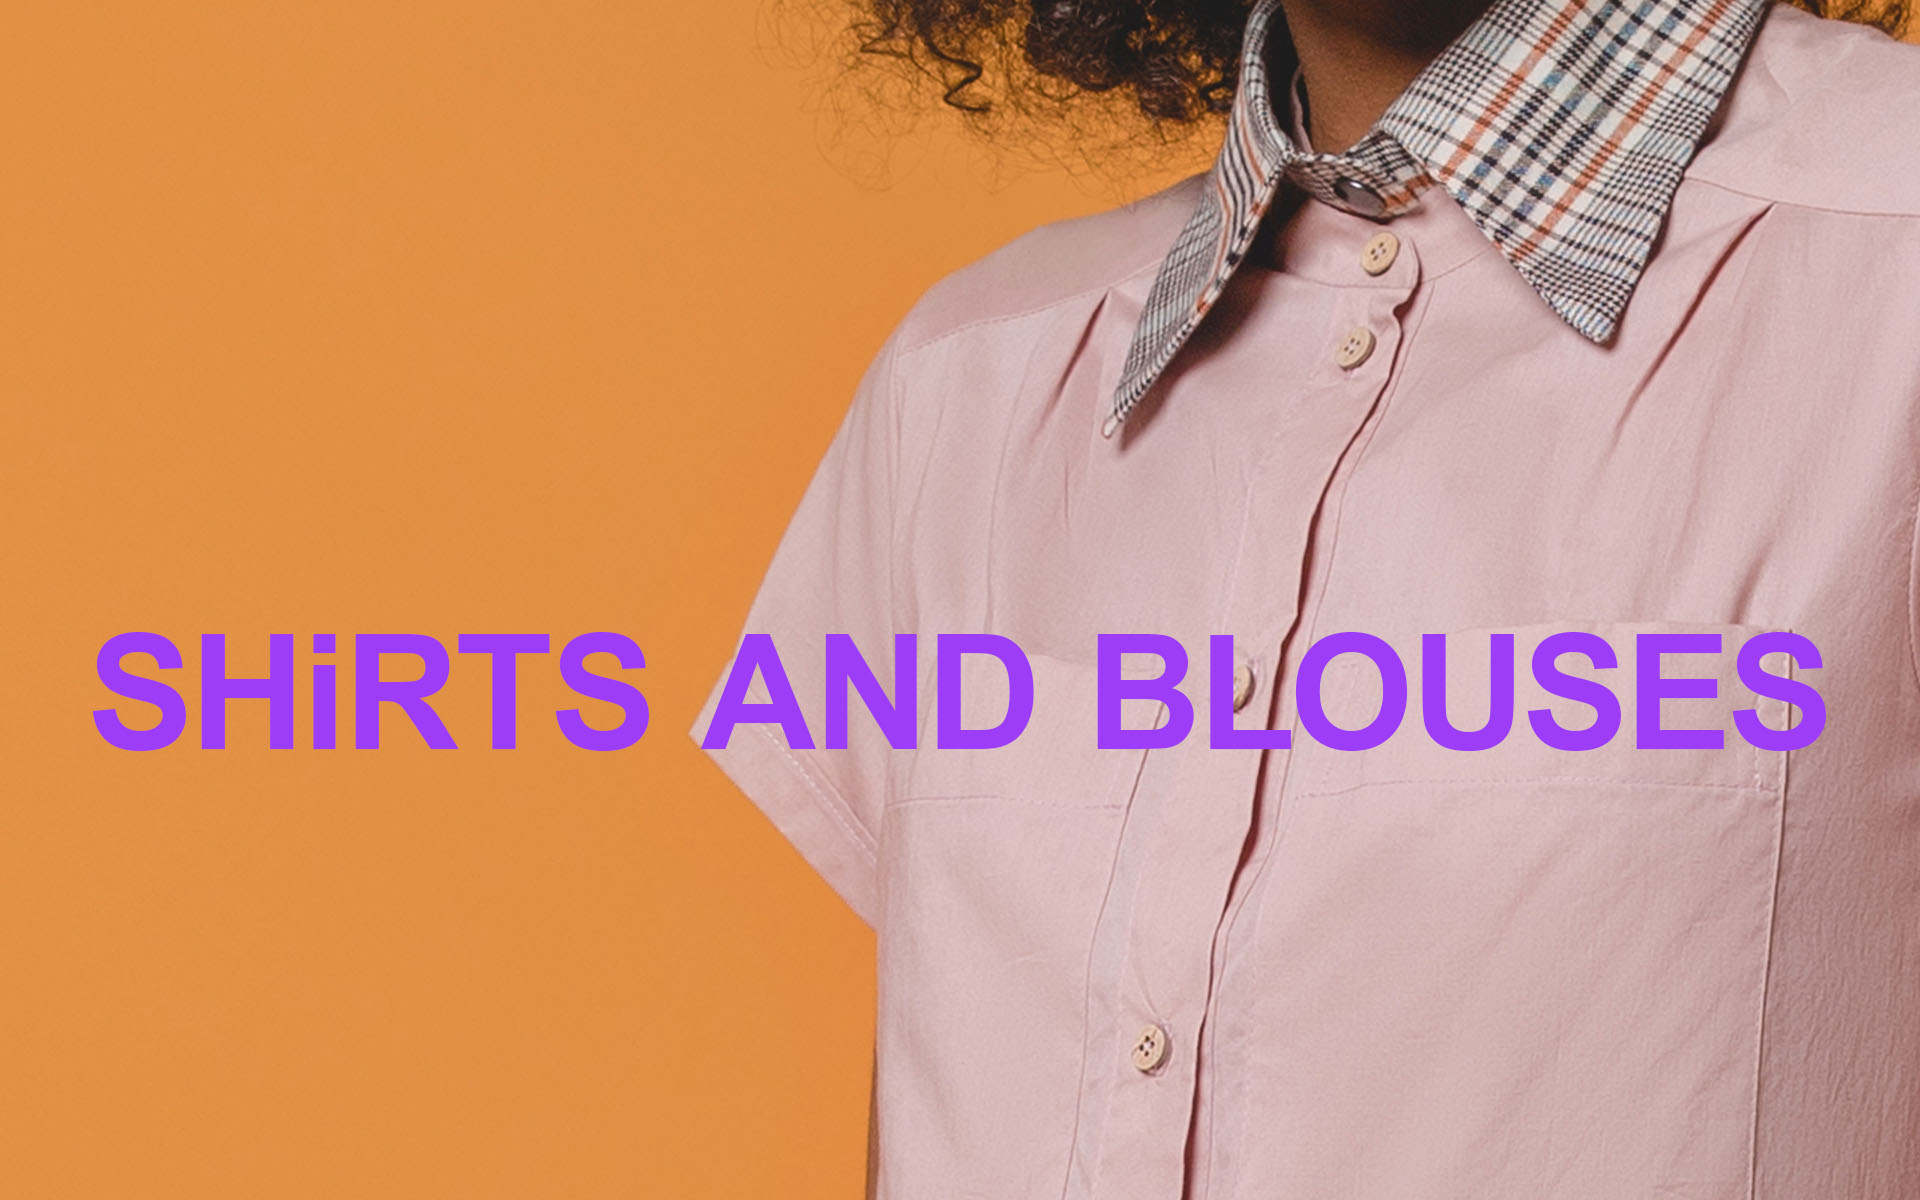 Shirts and Blouses